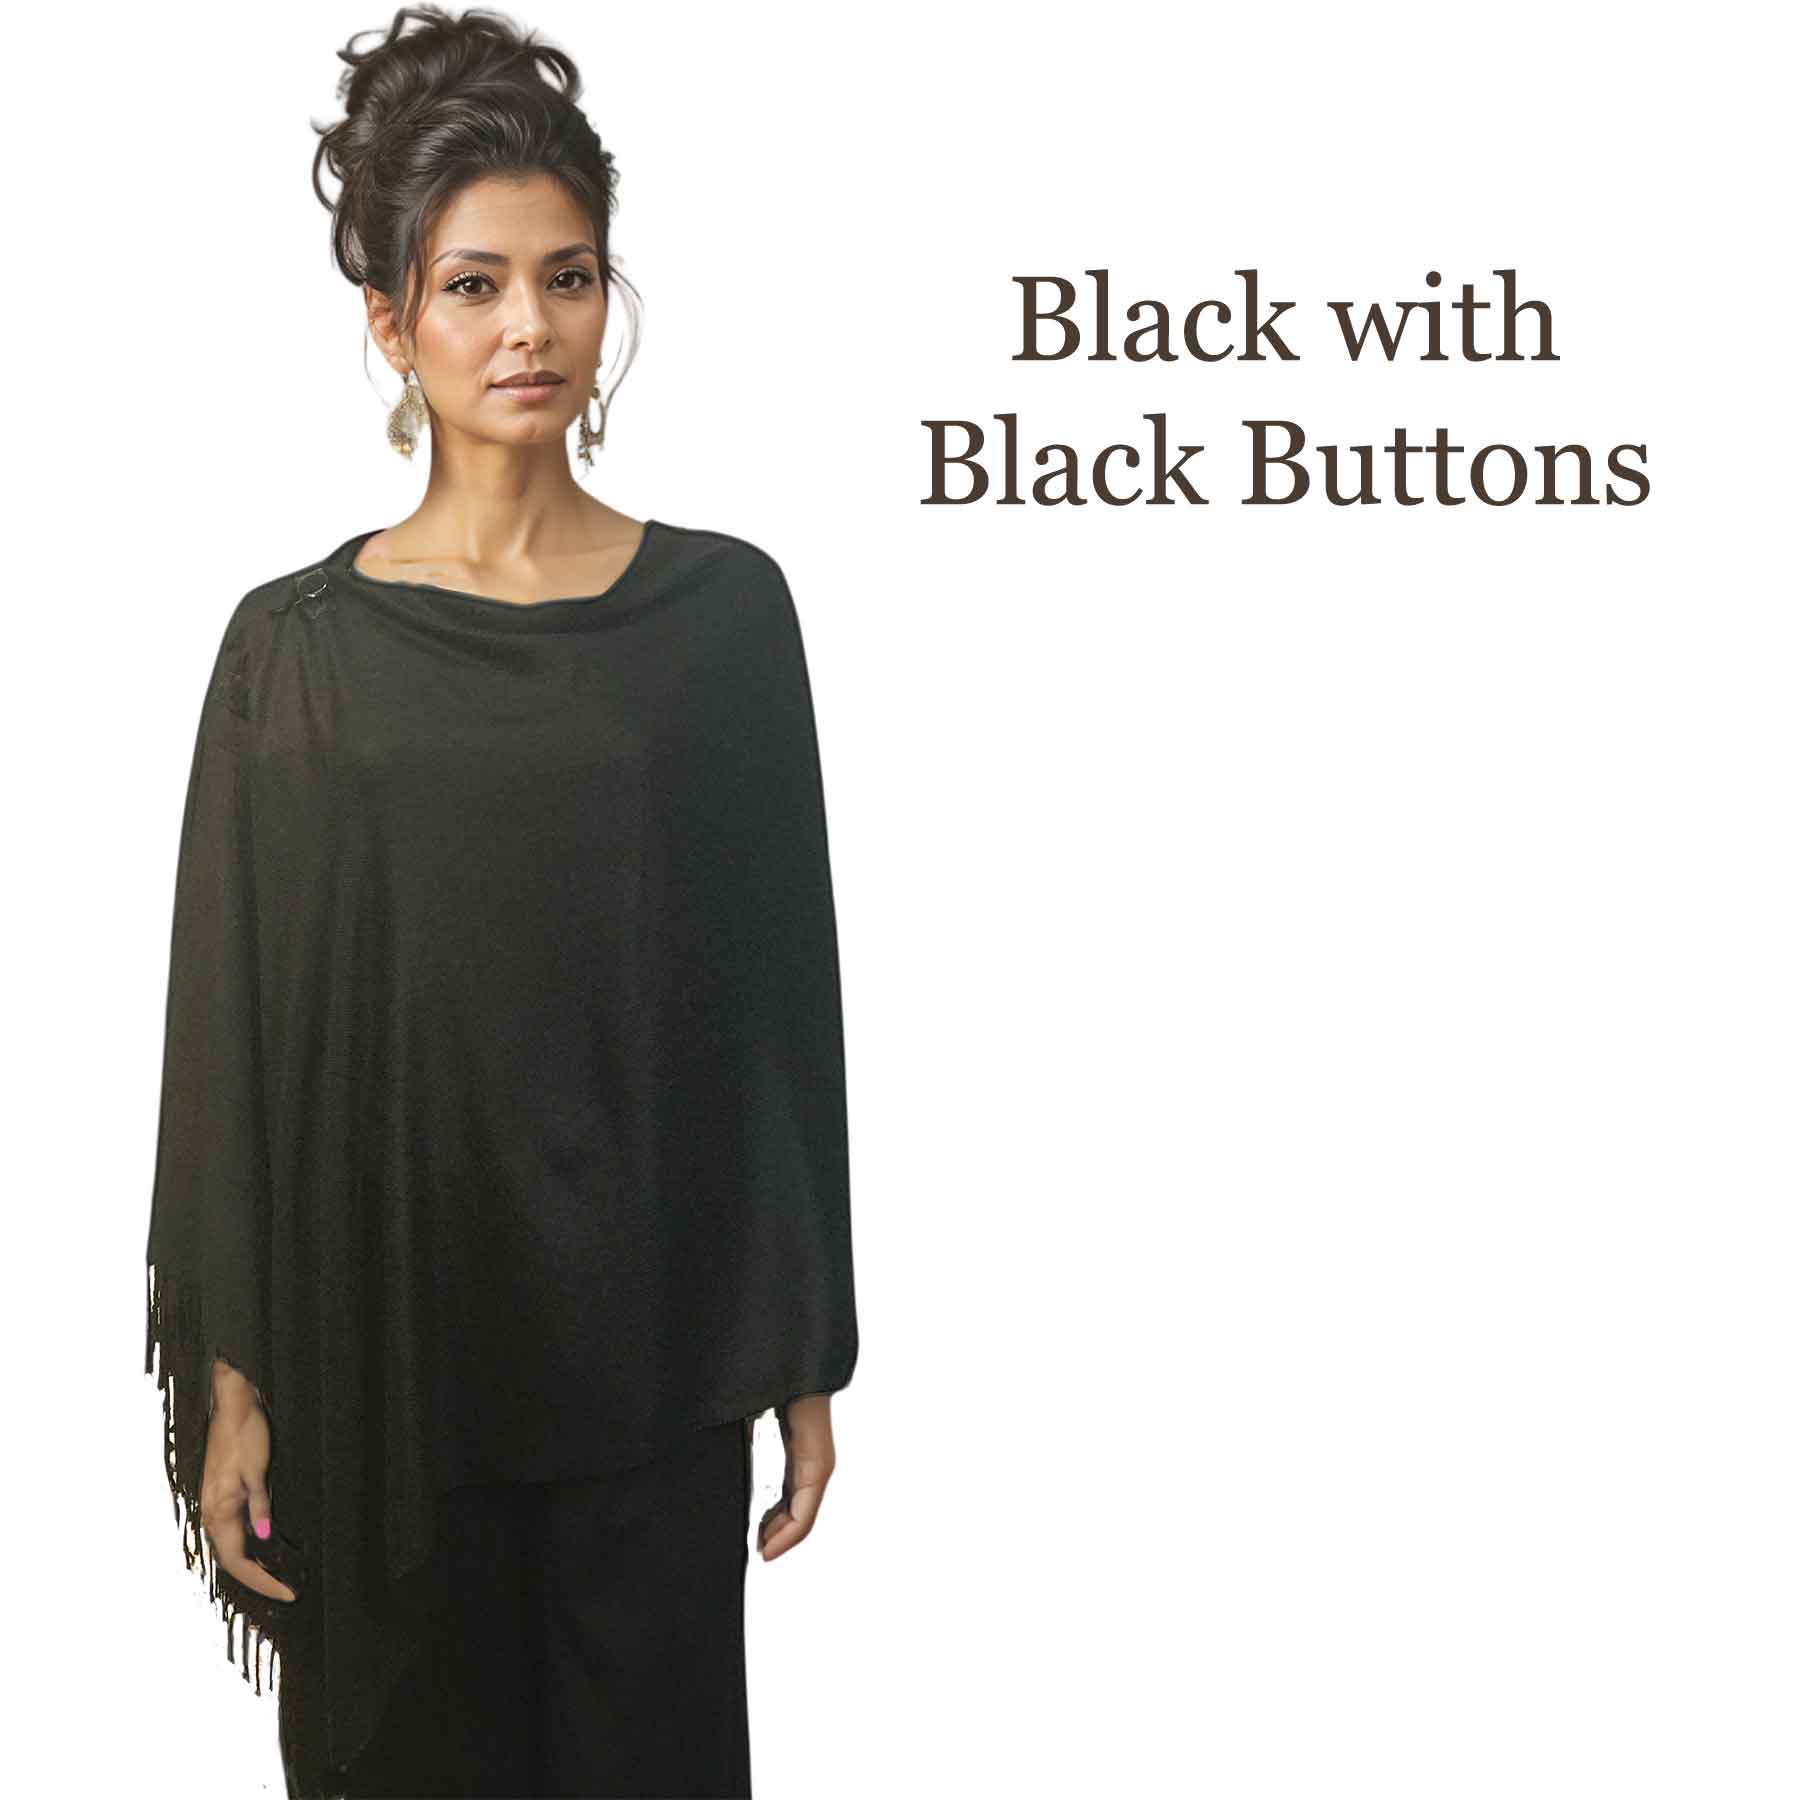 3109 - Solid Black<br>
Pashmina Style Button Shawl